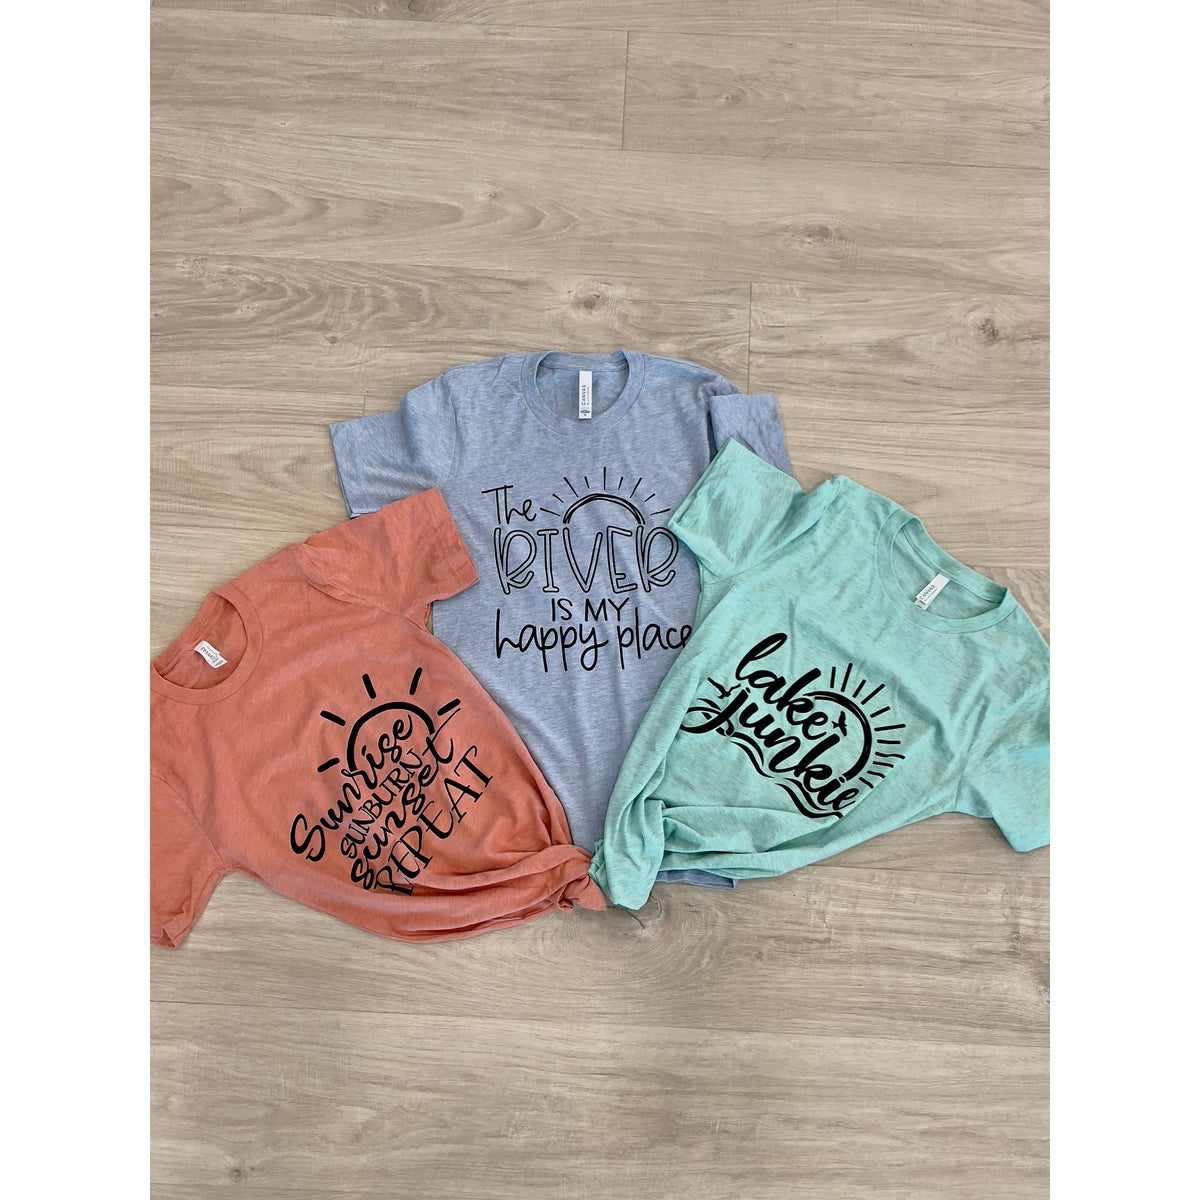 Multicolored Summer Graphic Tees - SLATE Boutique & Gifts